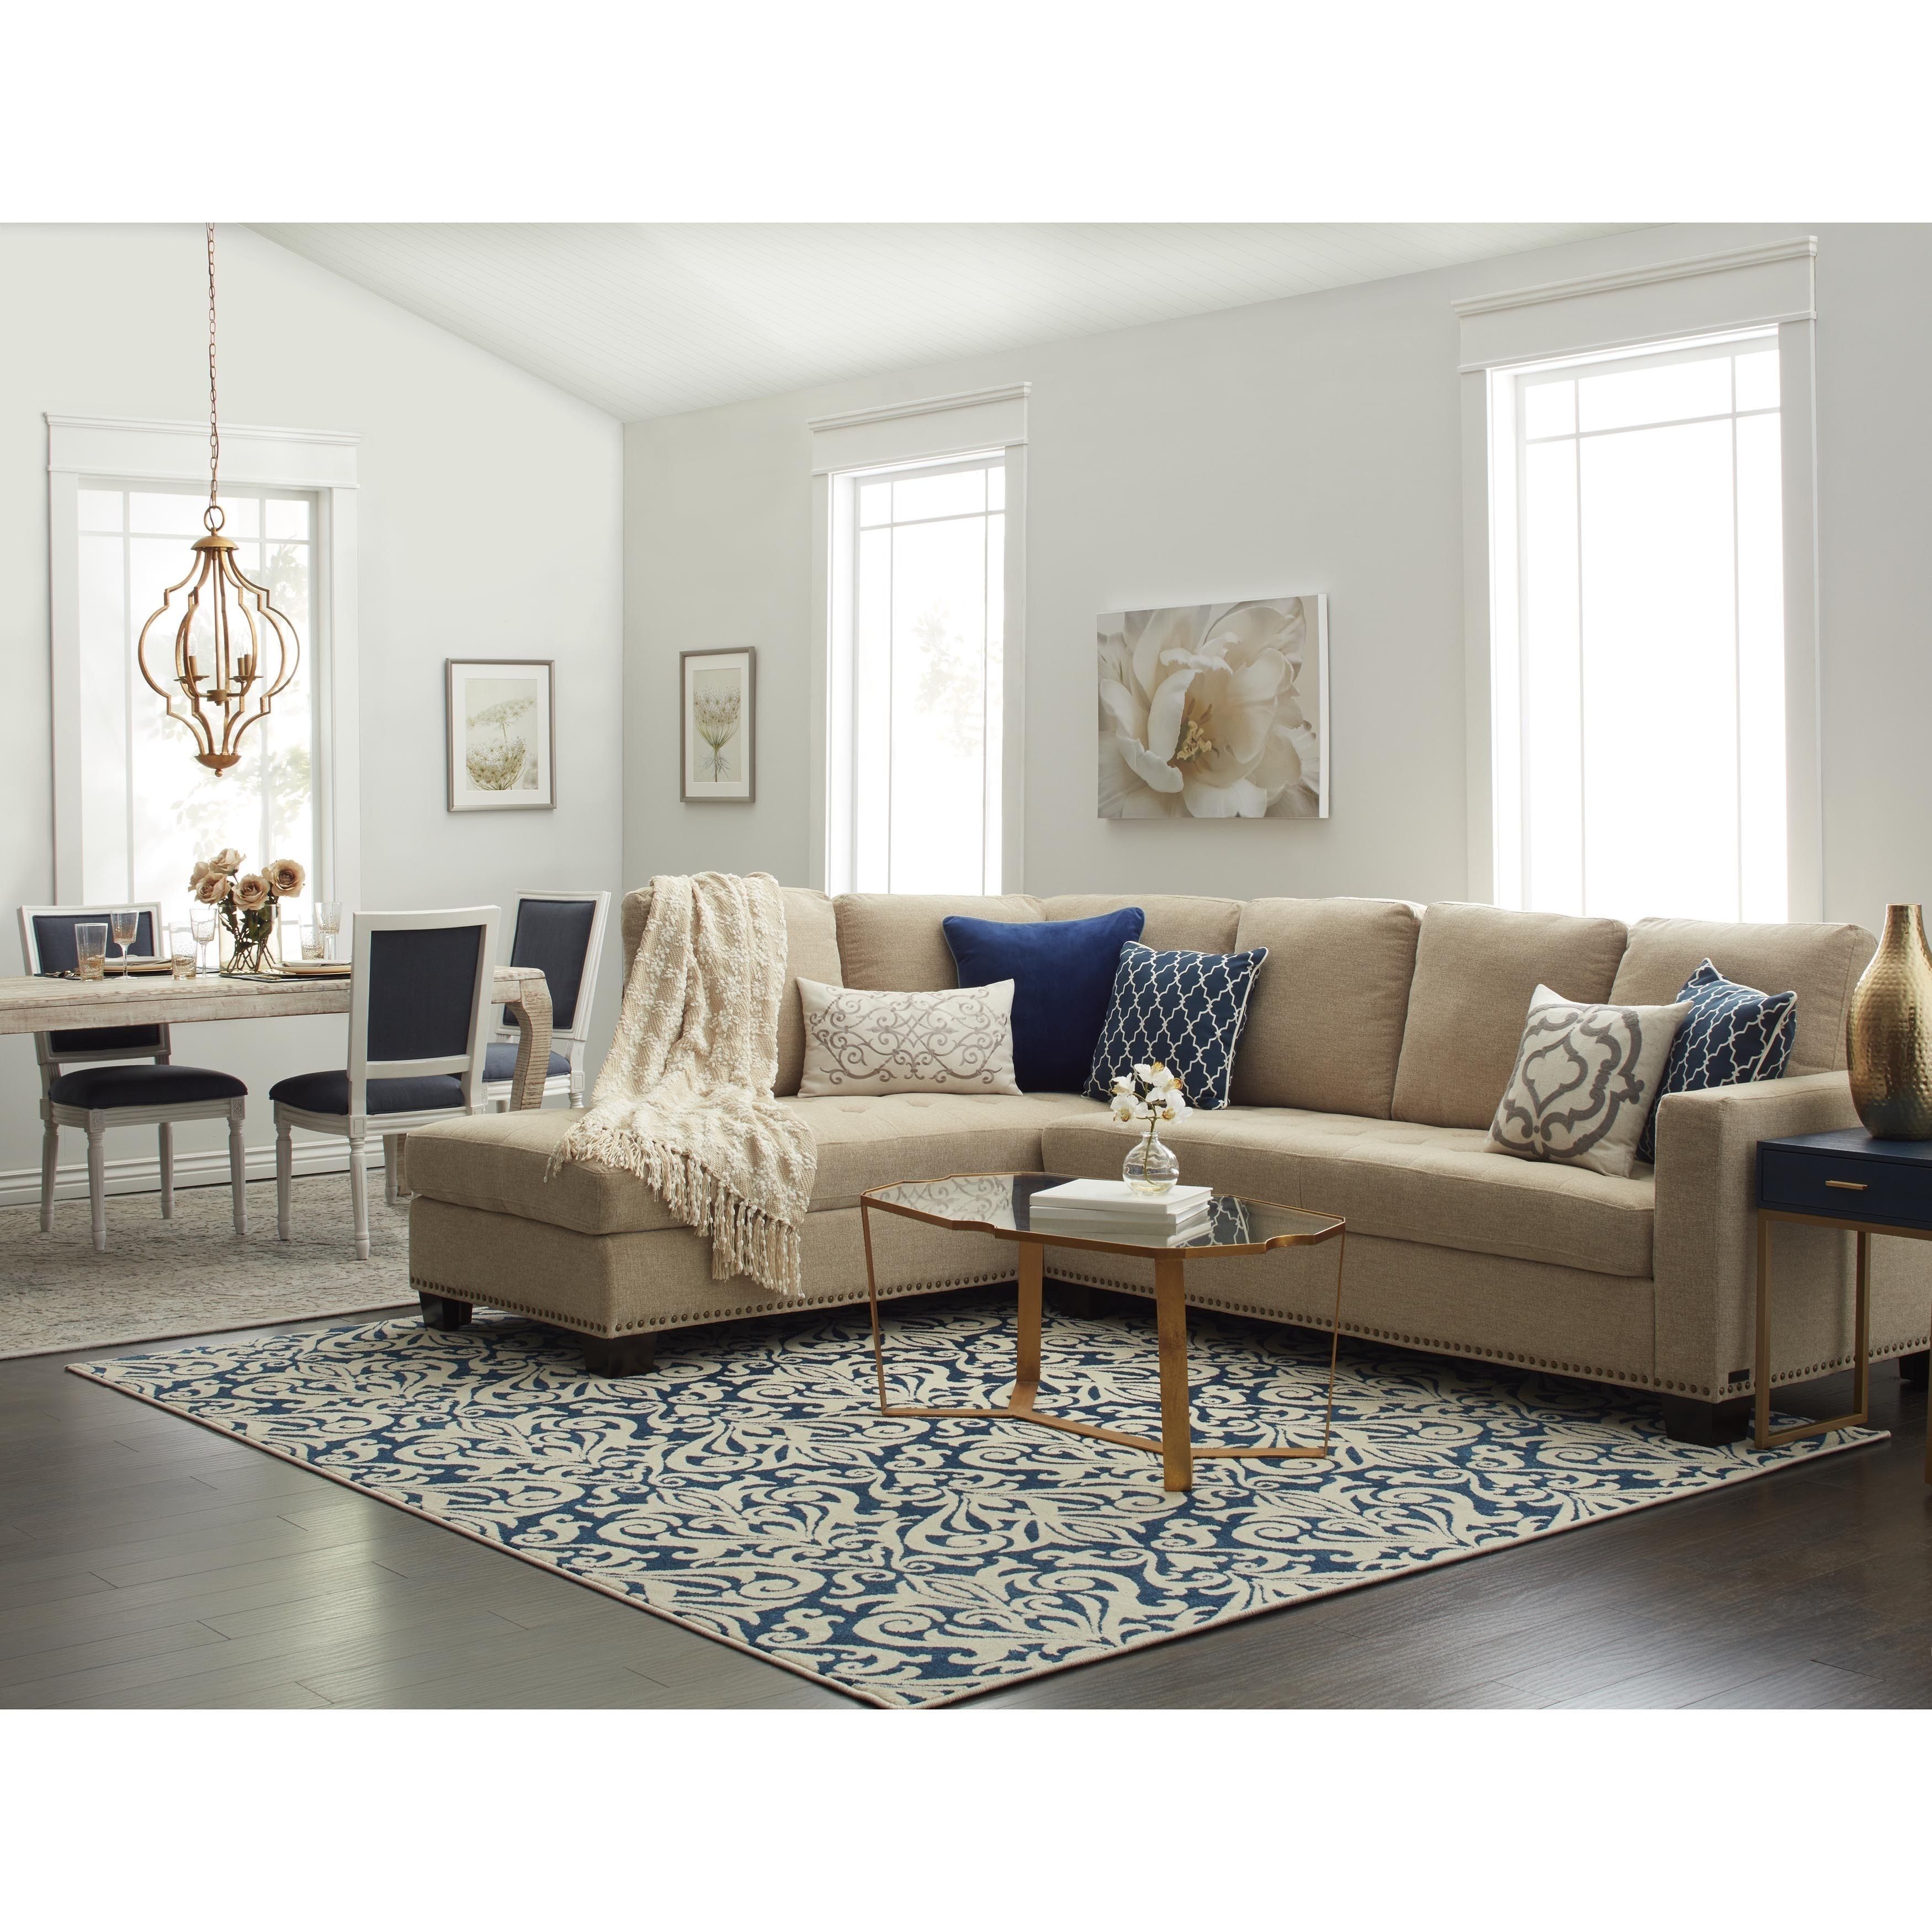 10 The Best Overstock Sectional Sofas